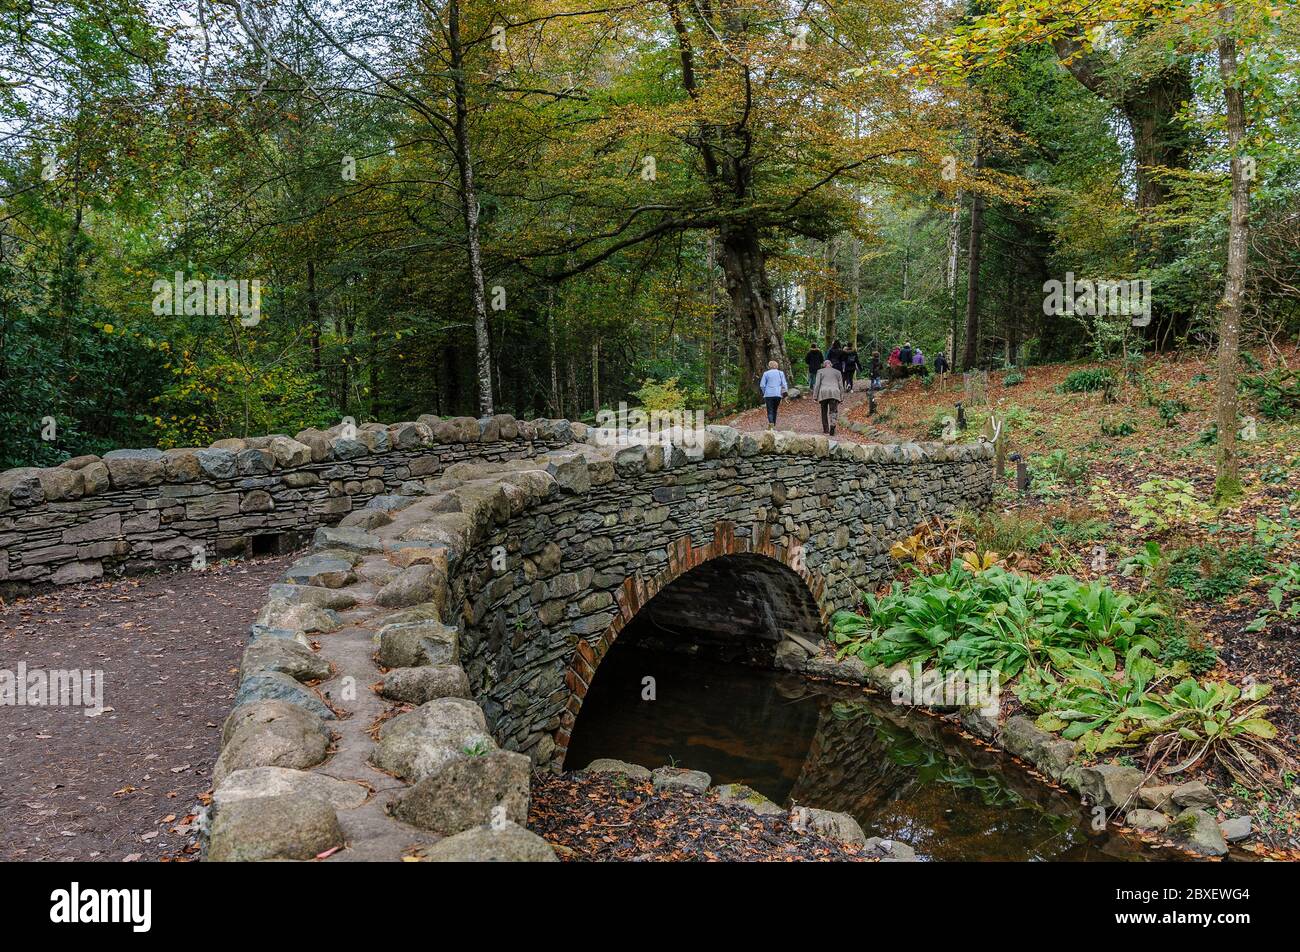 Visitors on the Lingholm Estate near Kewsick, Cumbria, England walking on a path over a stone bridge and through deciduous woodland. Stock Photo